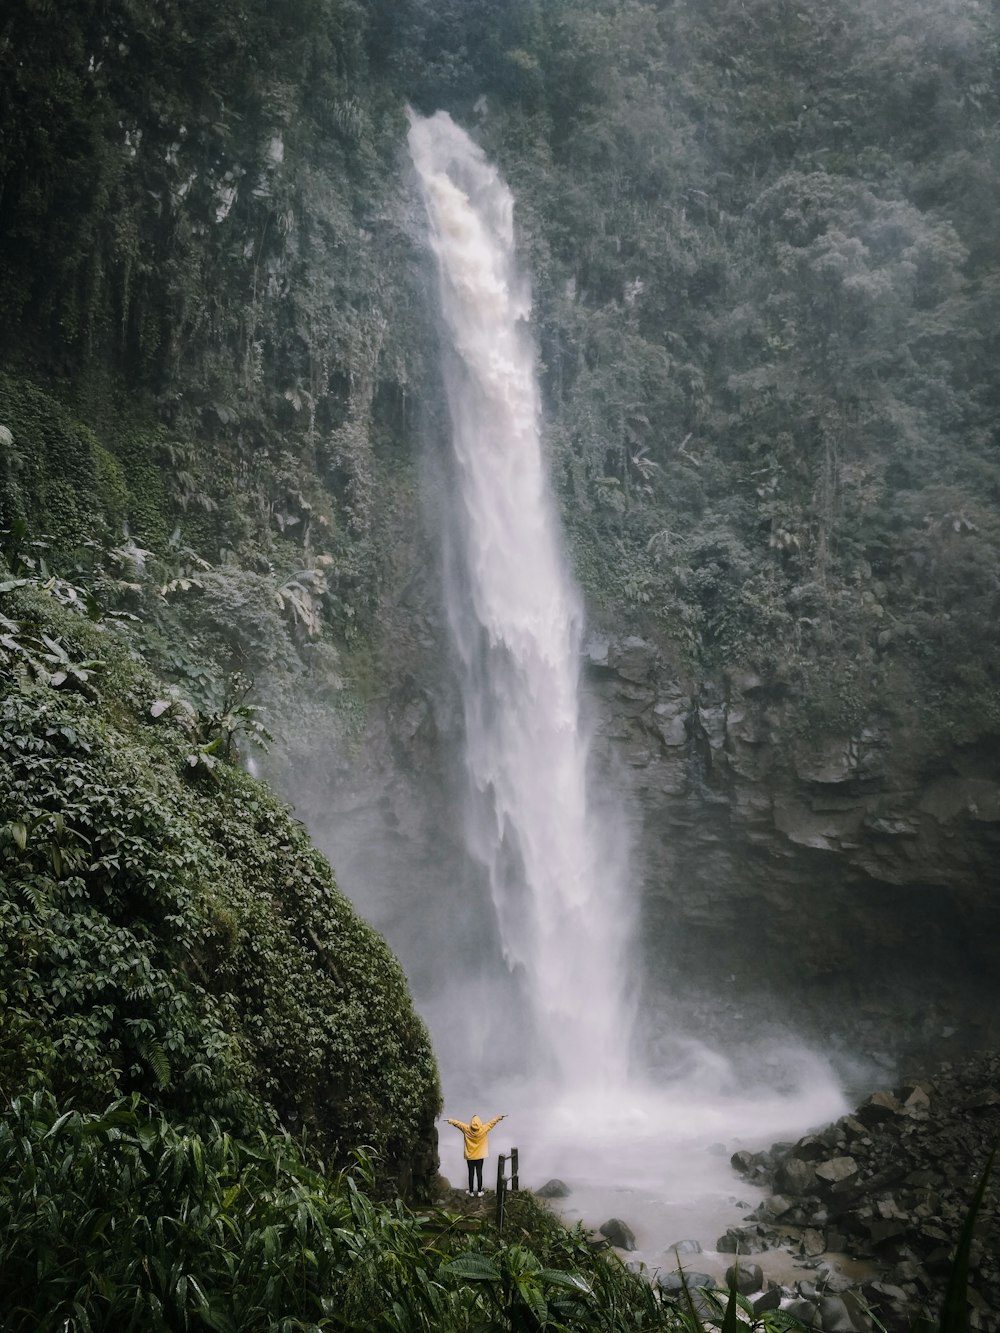 person raising his hand in front of waterfall during daytime